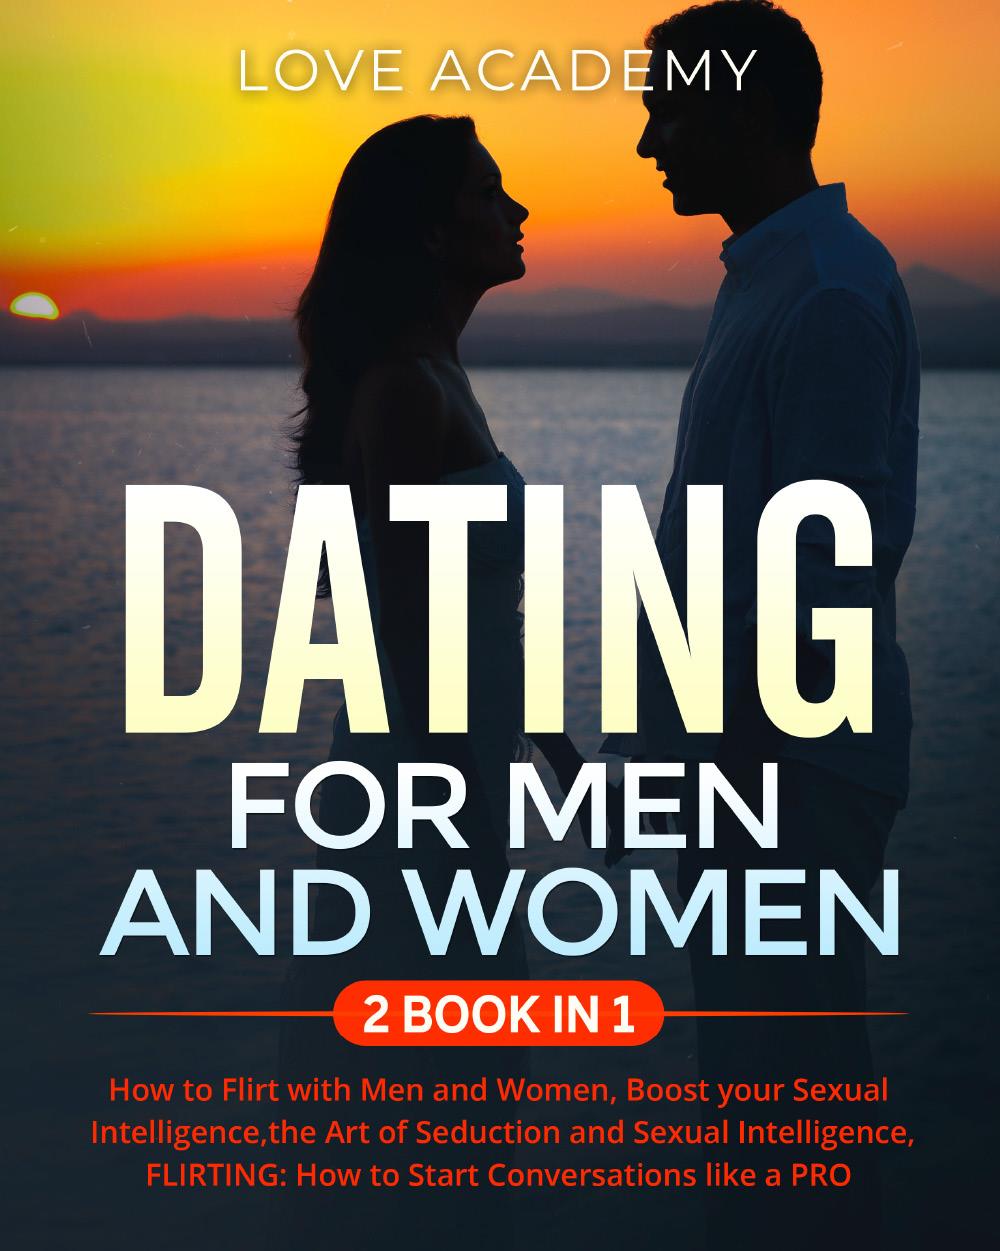 DATING for Men and Women (2 BOOK IN 1). How to Flirt with Men and Women, Boost your Sexual Intelligence,the Art of Seduction and Sexual Intelligence, FLIRTING: How to Start Conversations like a PRO